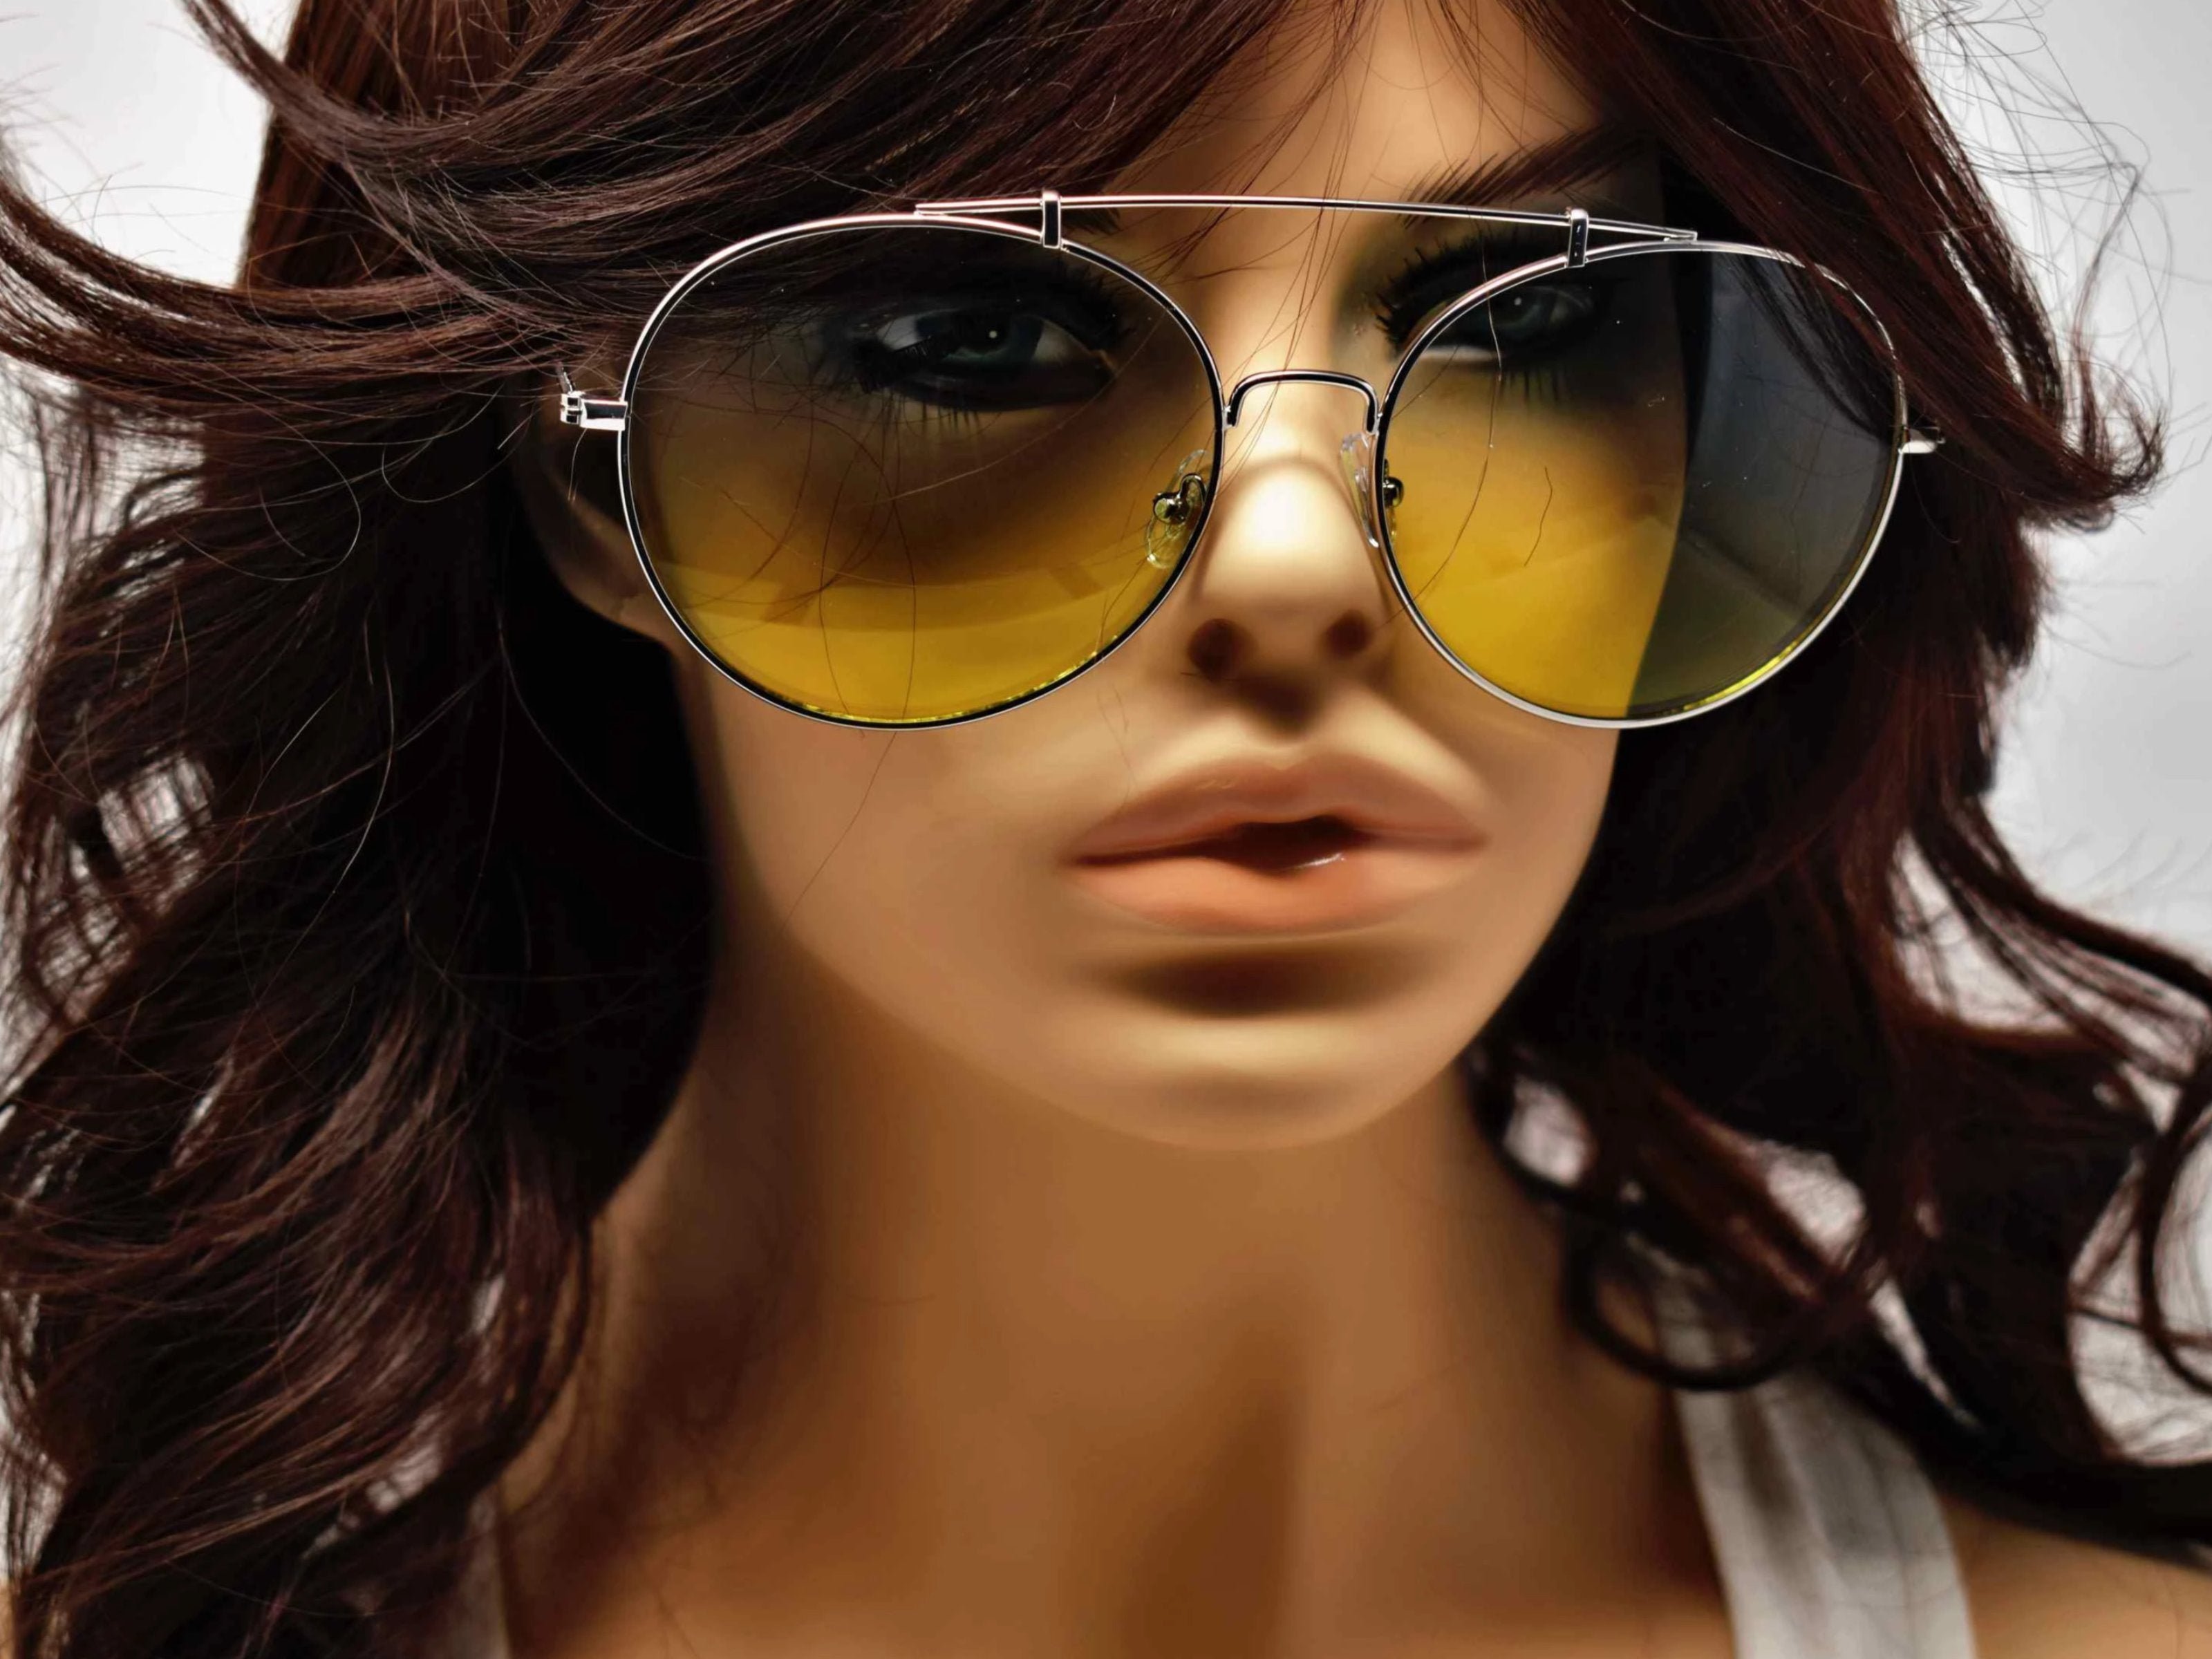 Va Va Voom will be consistently heard in these Vervain silver frame aviator Gray and Green ombre lens sunglasses.